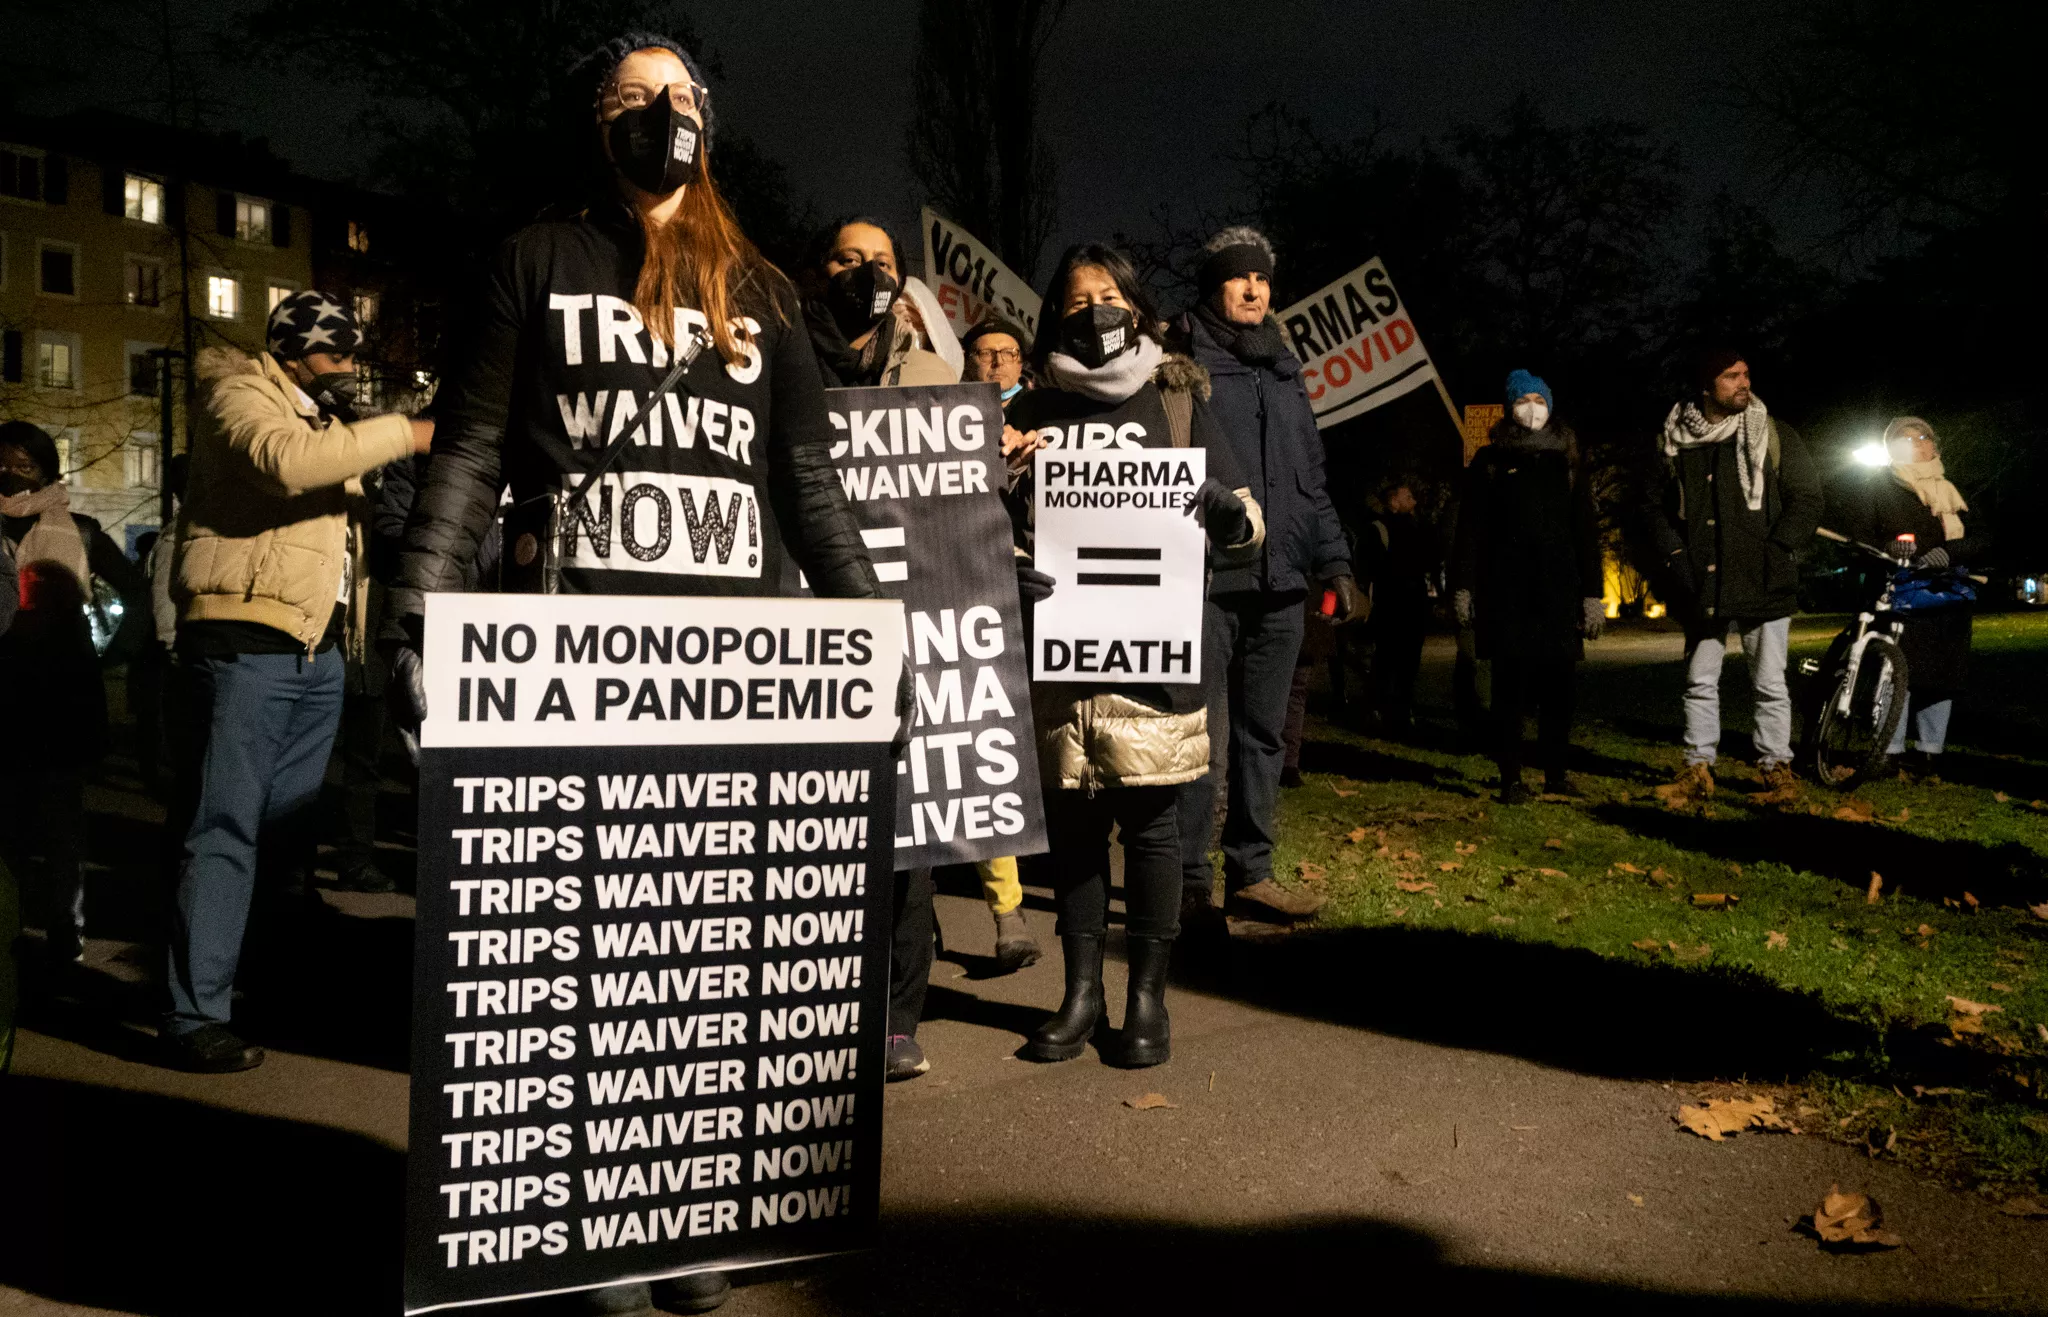 TRIPS Waiver - No monopolies in a pandemic, Geneva protest, Switzerland. 